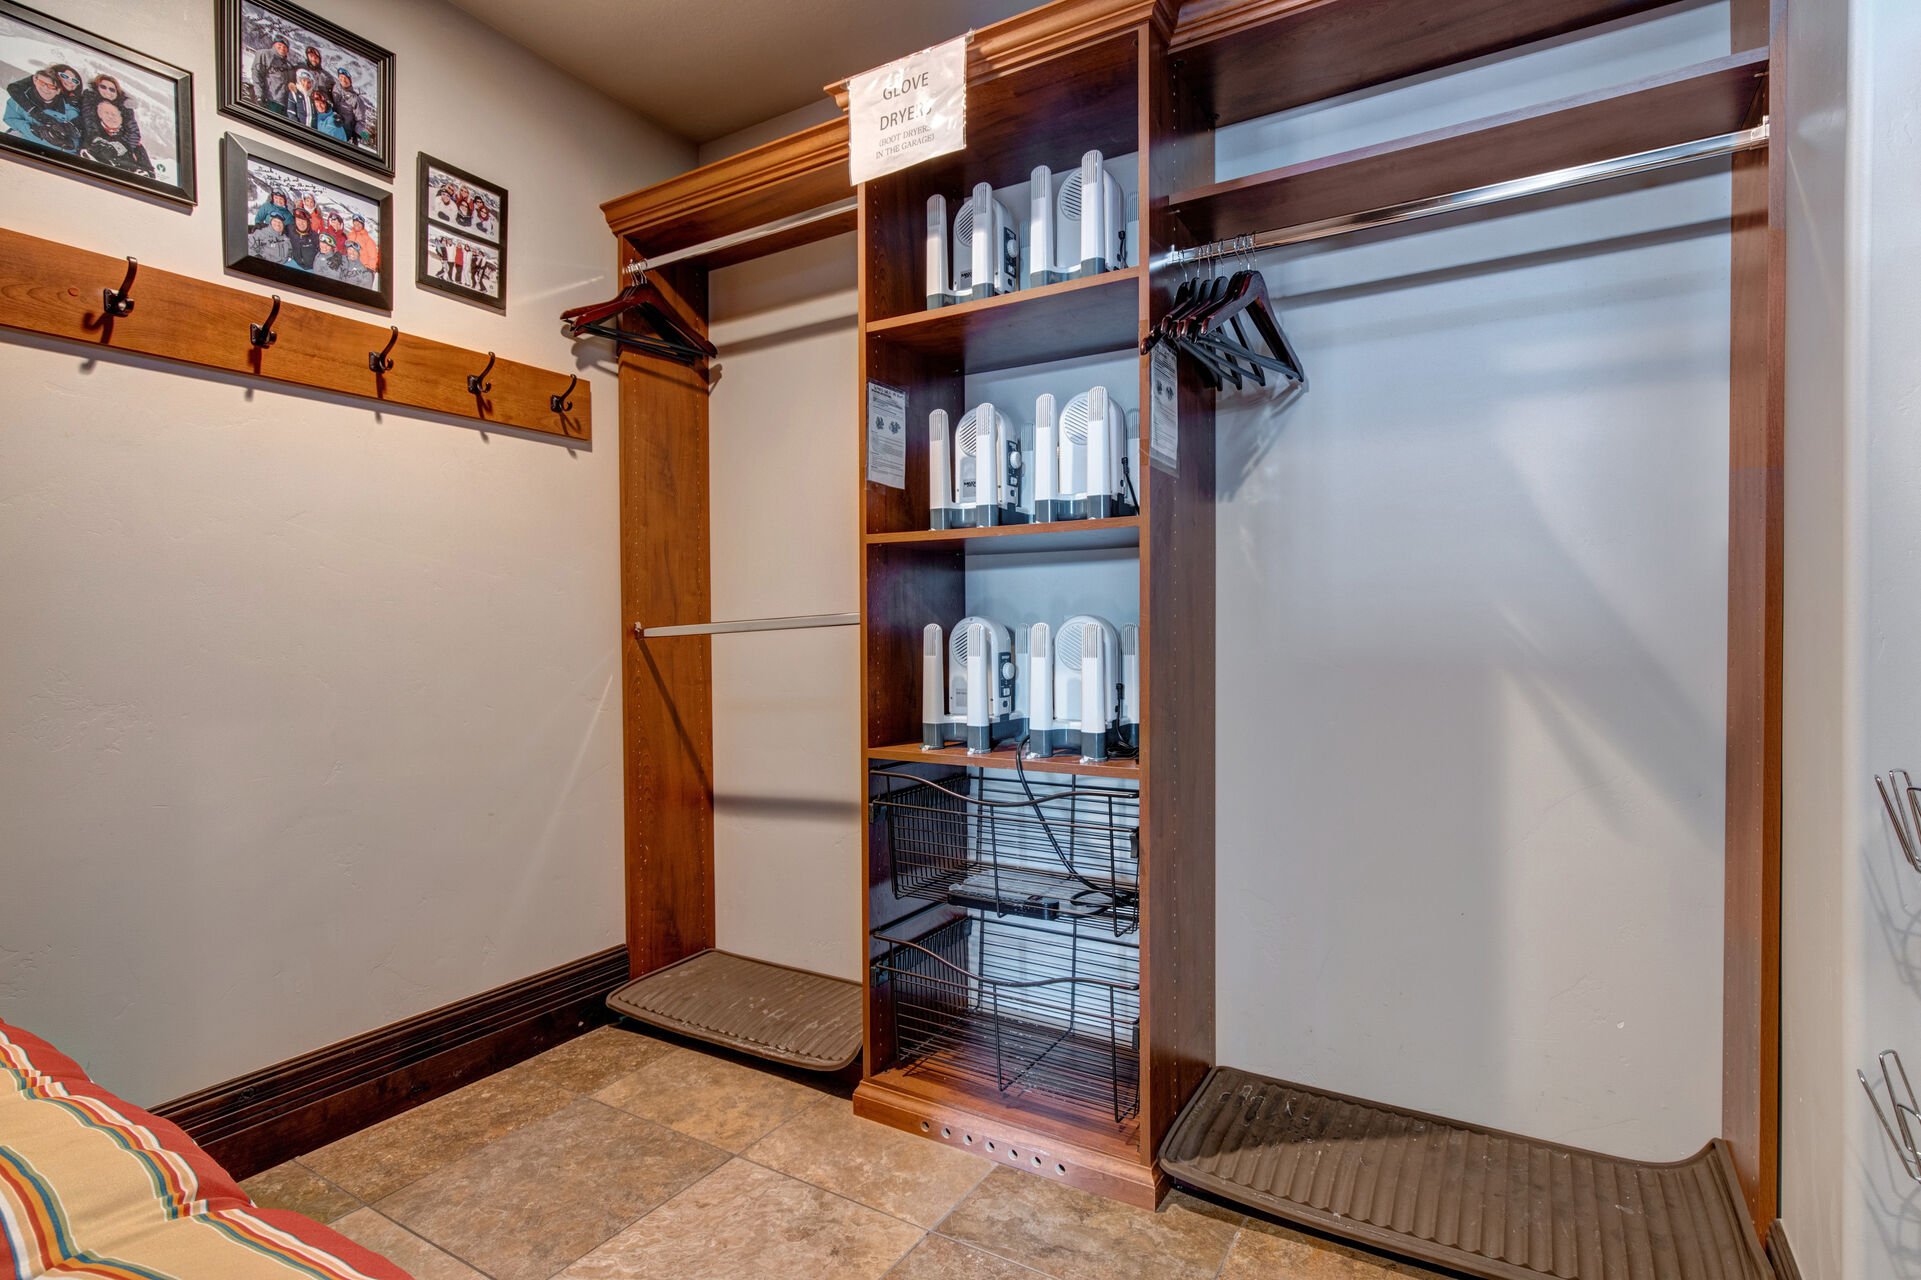 Mud Room with 12 glove warmers and room to hang wet outerwear. (Garage features storage for skiing hardware: 12 ski hangers and 12 boot warmers.)